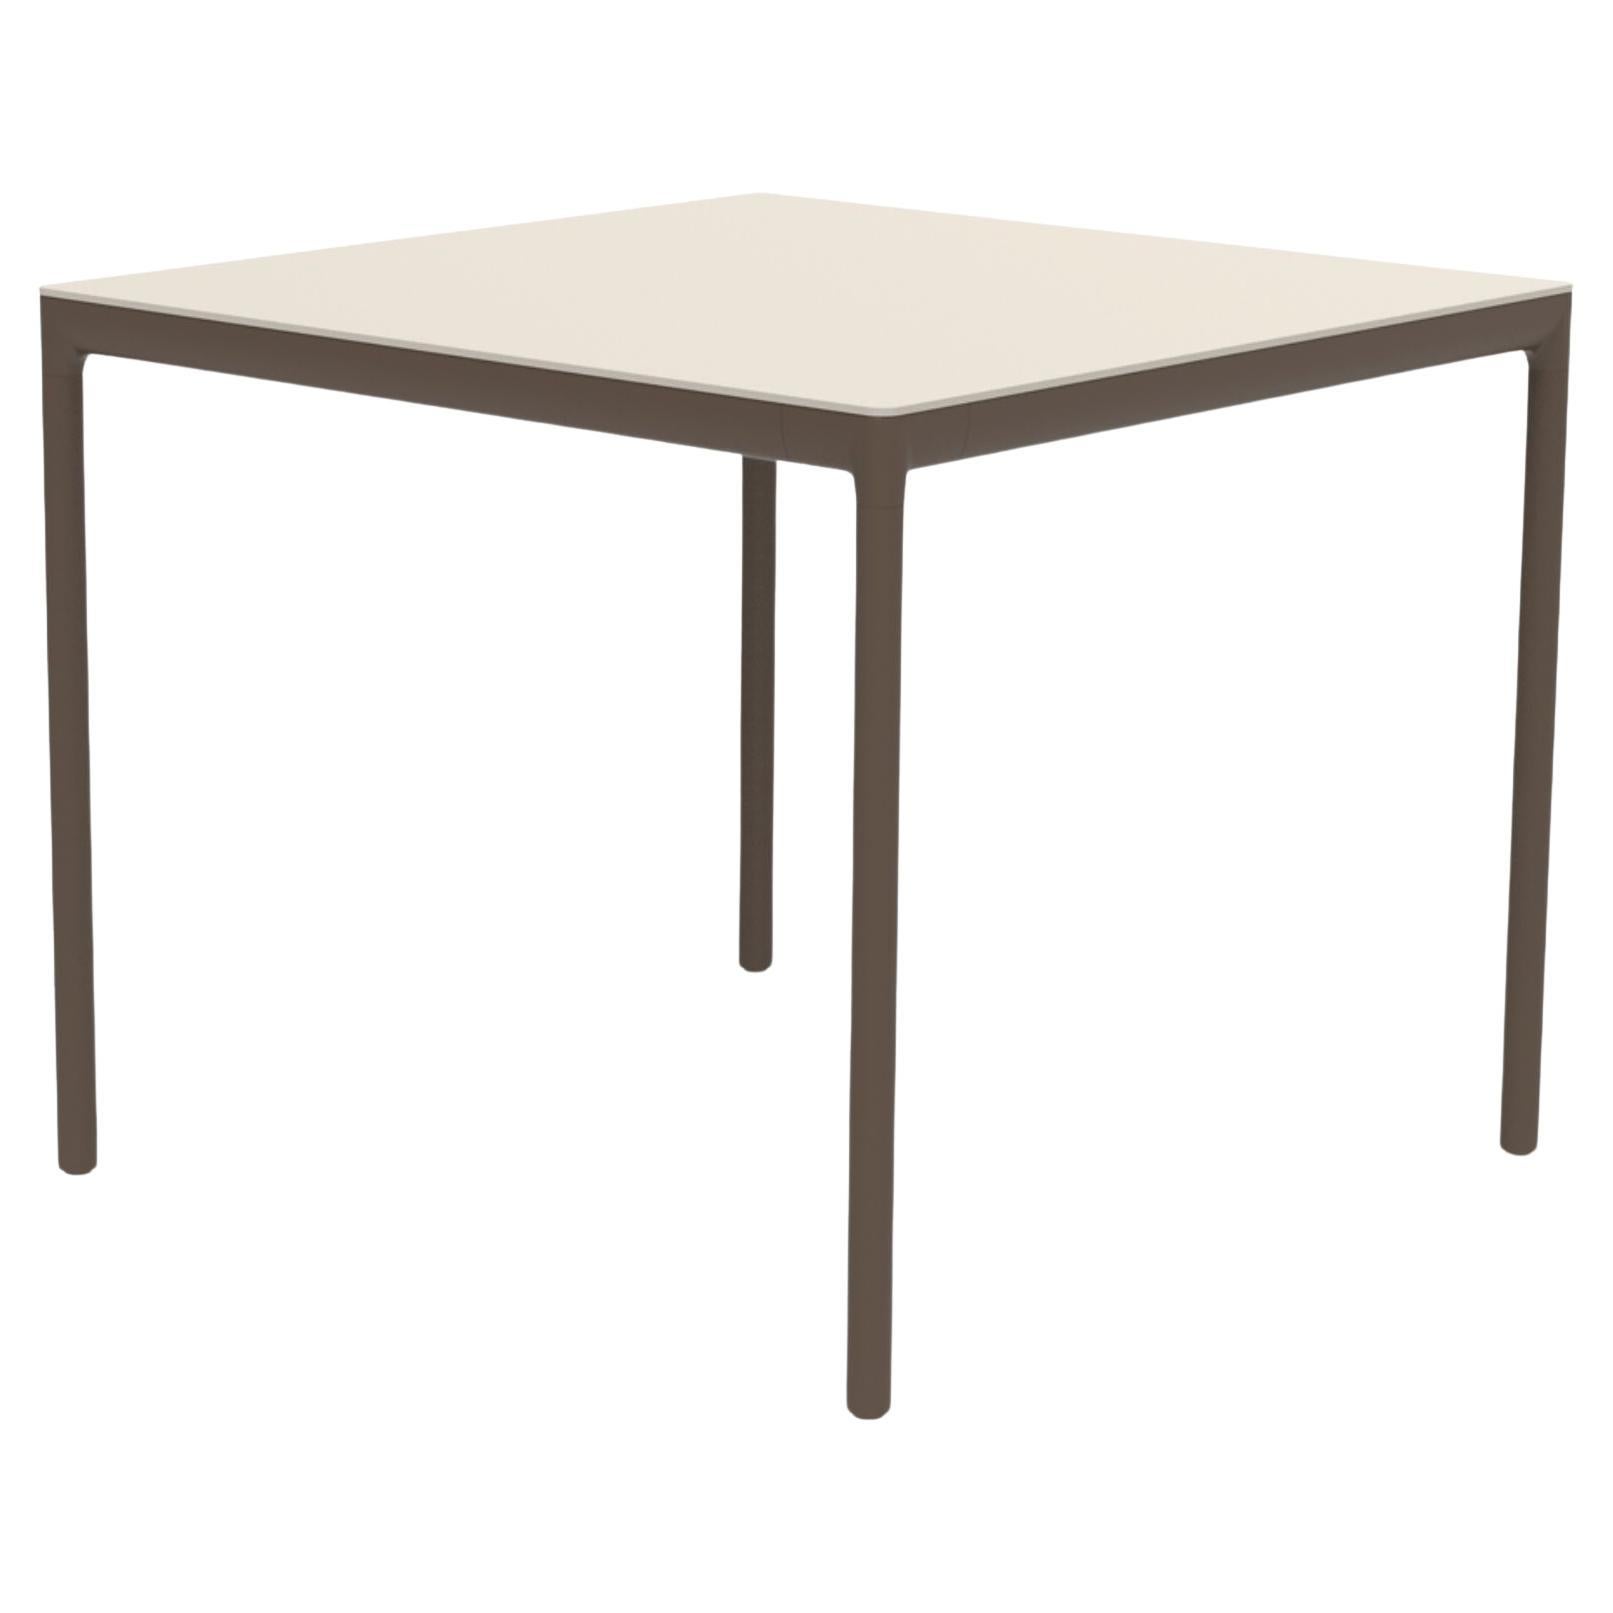 Ribbons Bronze 90 Table by Mowee